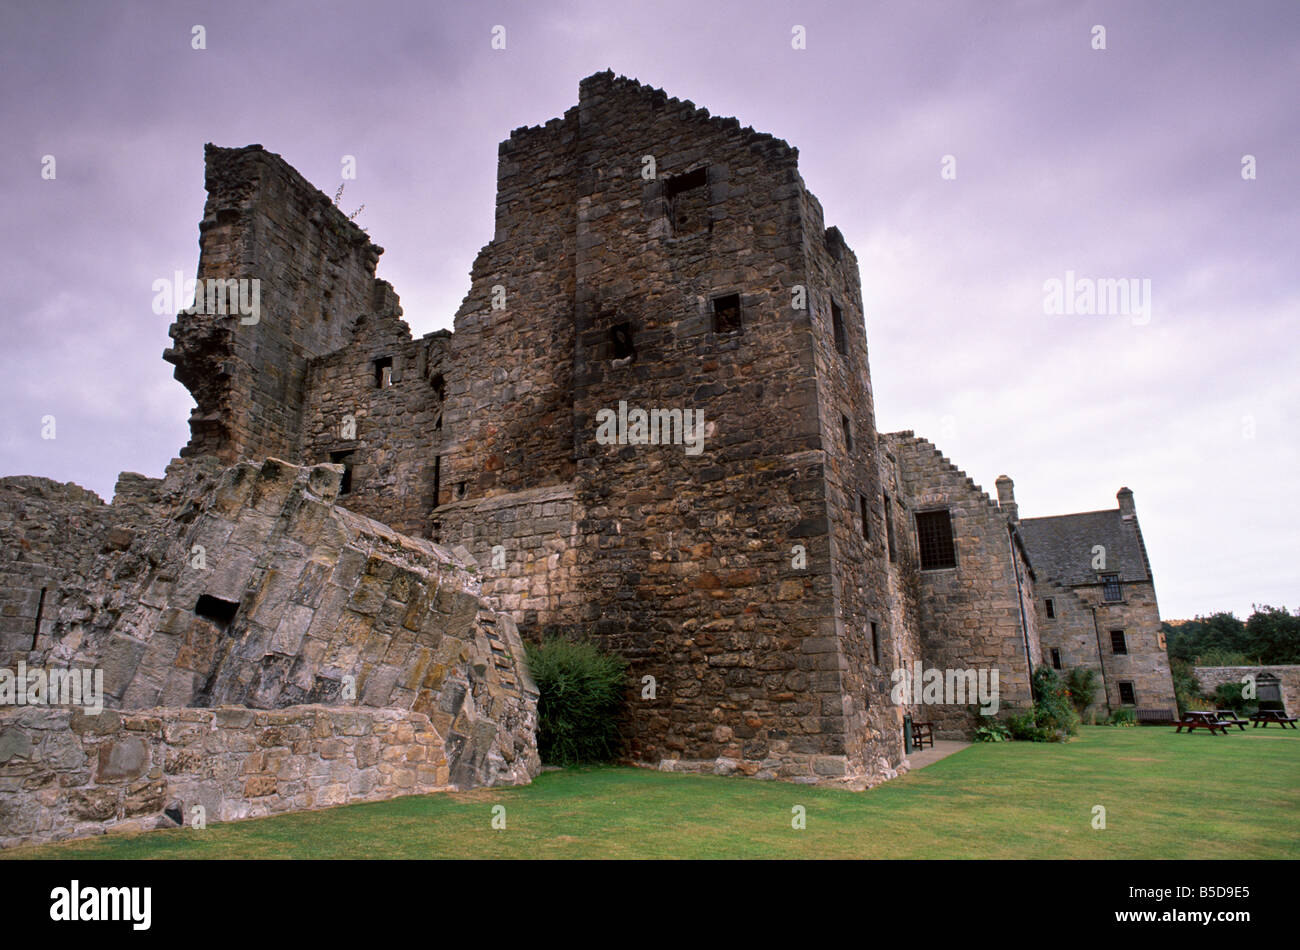 Aberdour Castle, 14th century tower and additions from the 16th and 17th centuries, Aberdour, near Dunfermline, Fife, Scotland Stock Photo